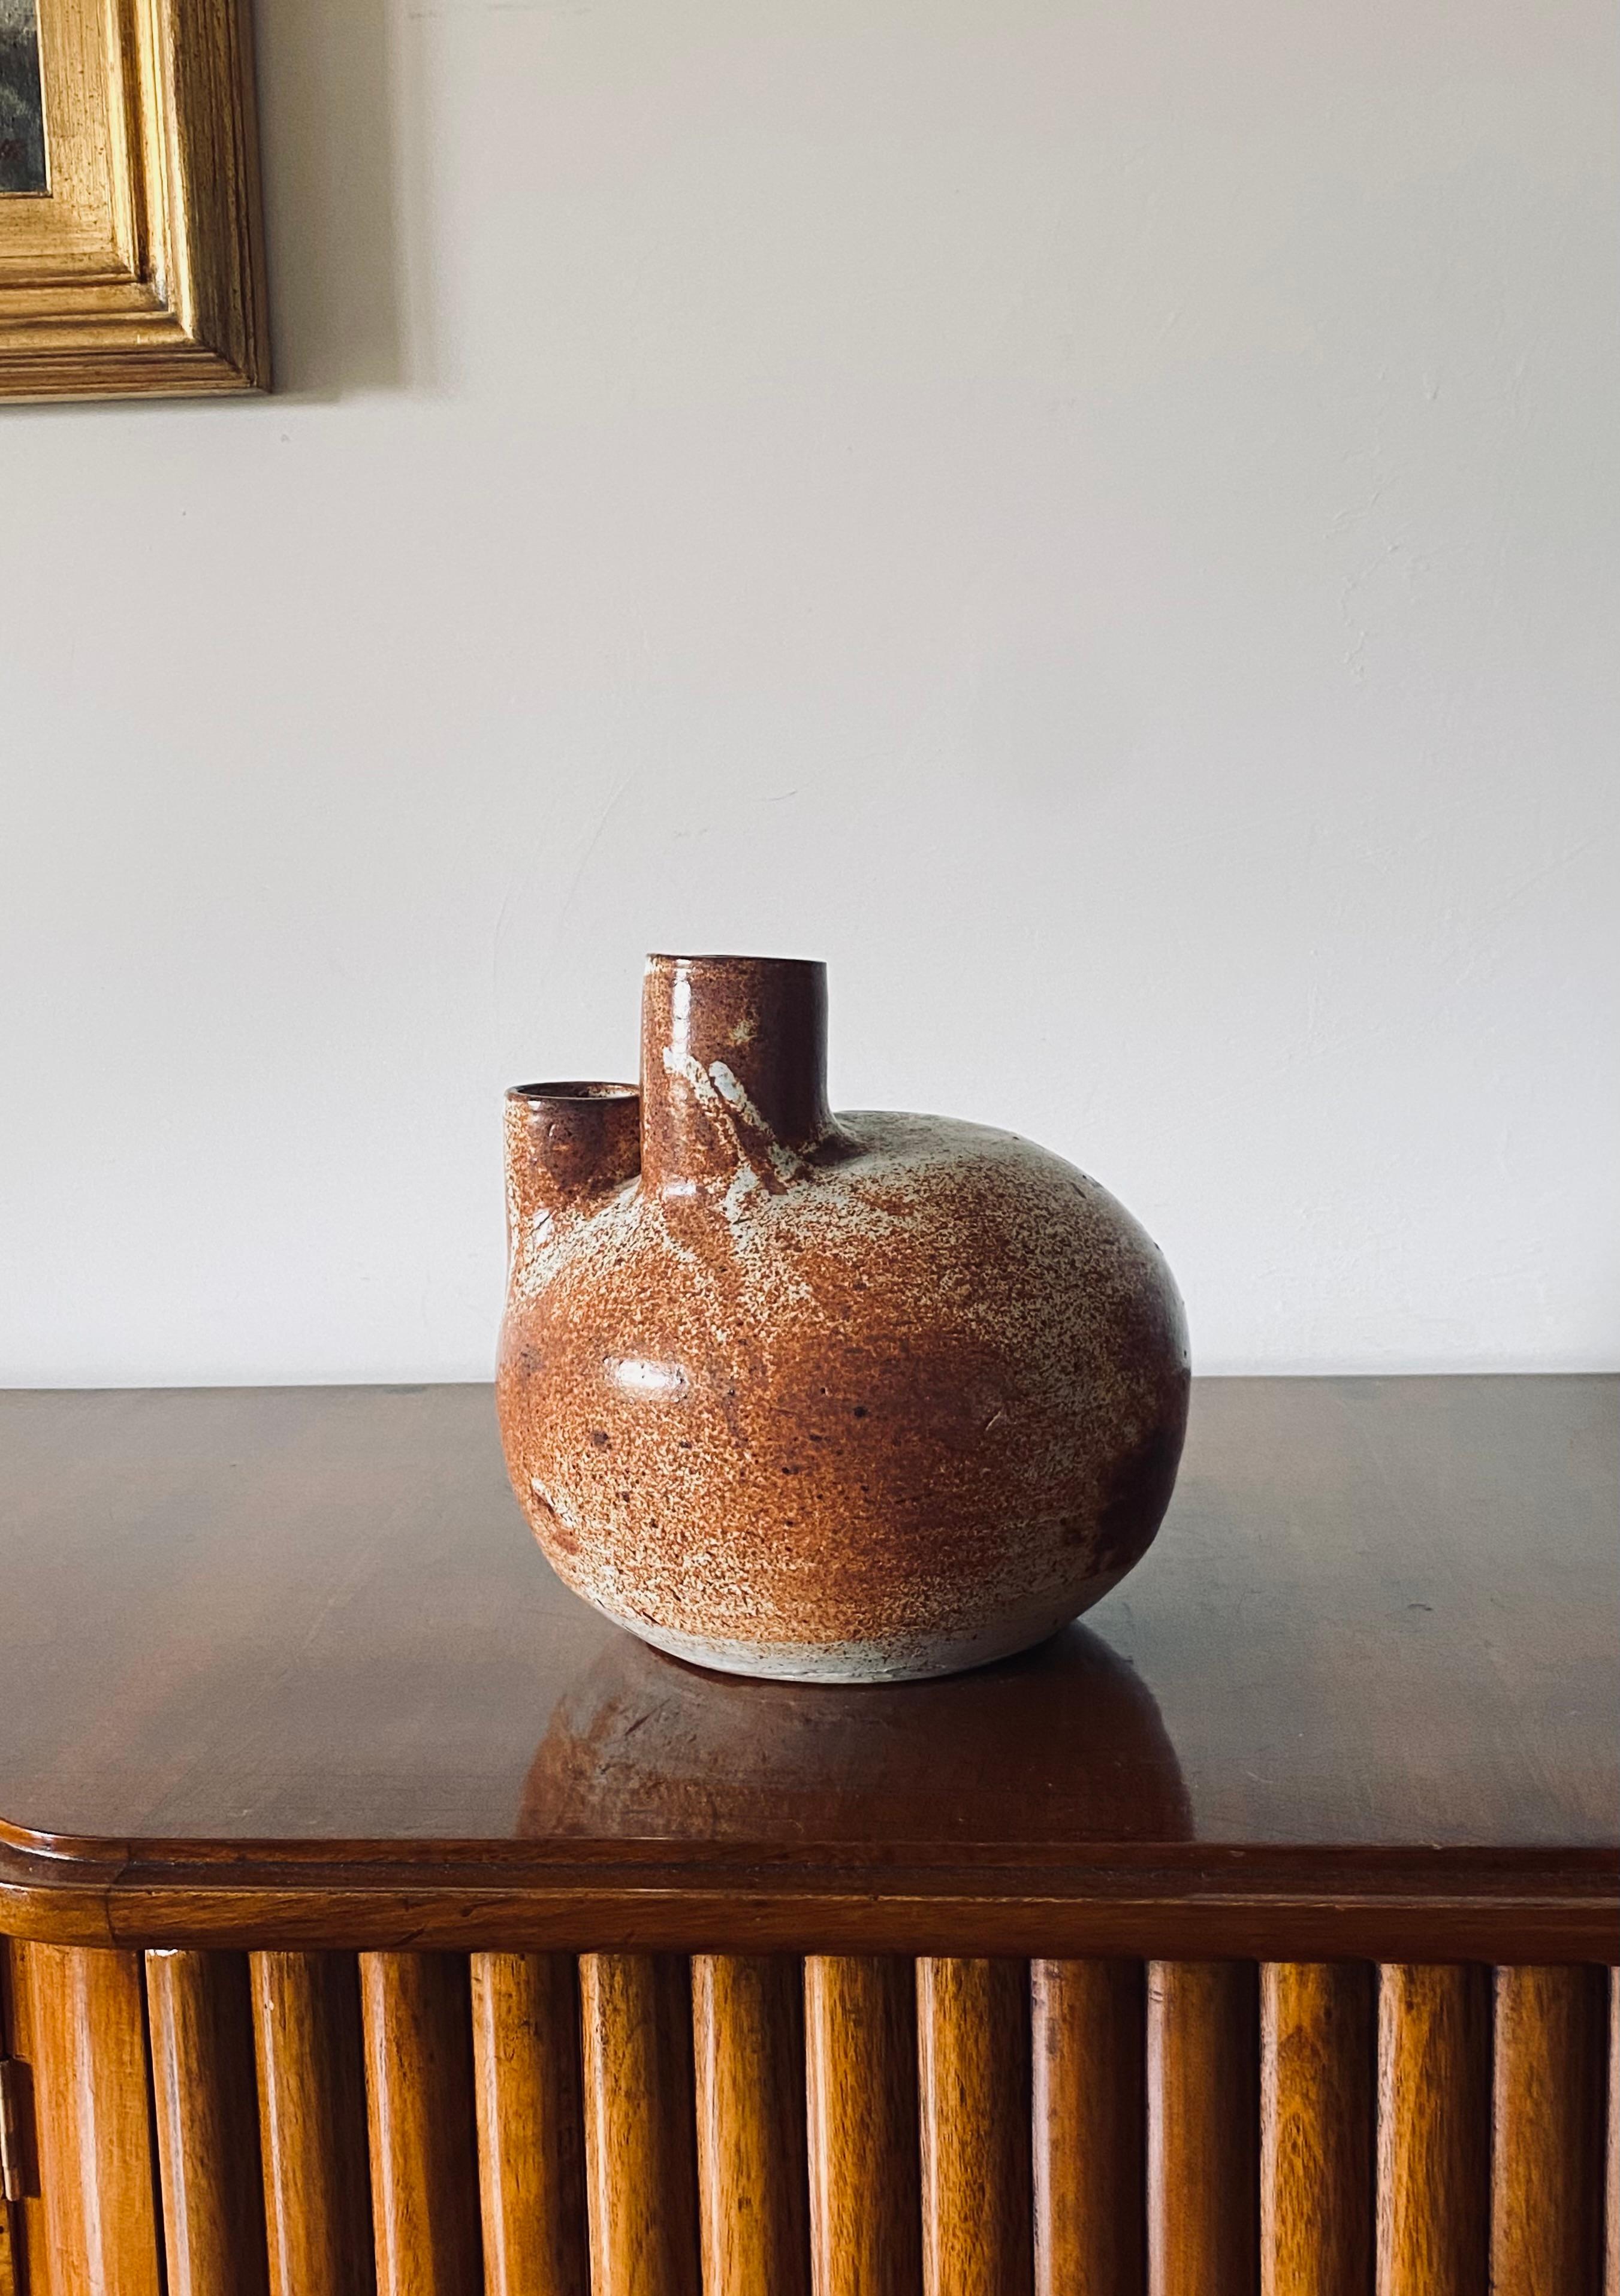 Organic modern brown earthenware vase

France 1970s

H 23.5 cm - 22 cm diam. 

Conditions: excellent, no defects